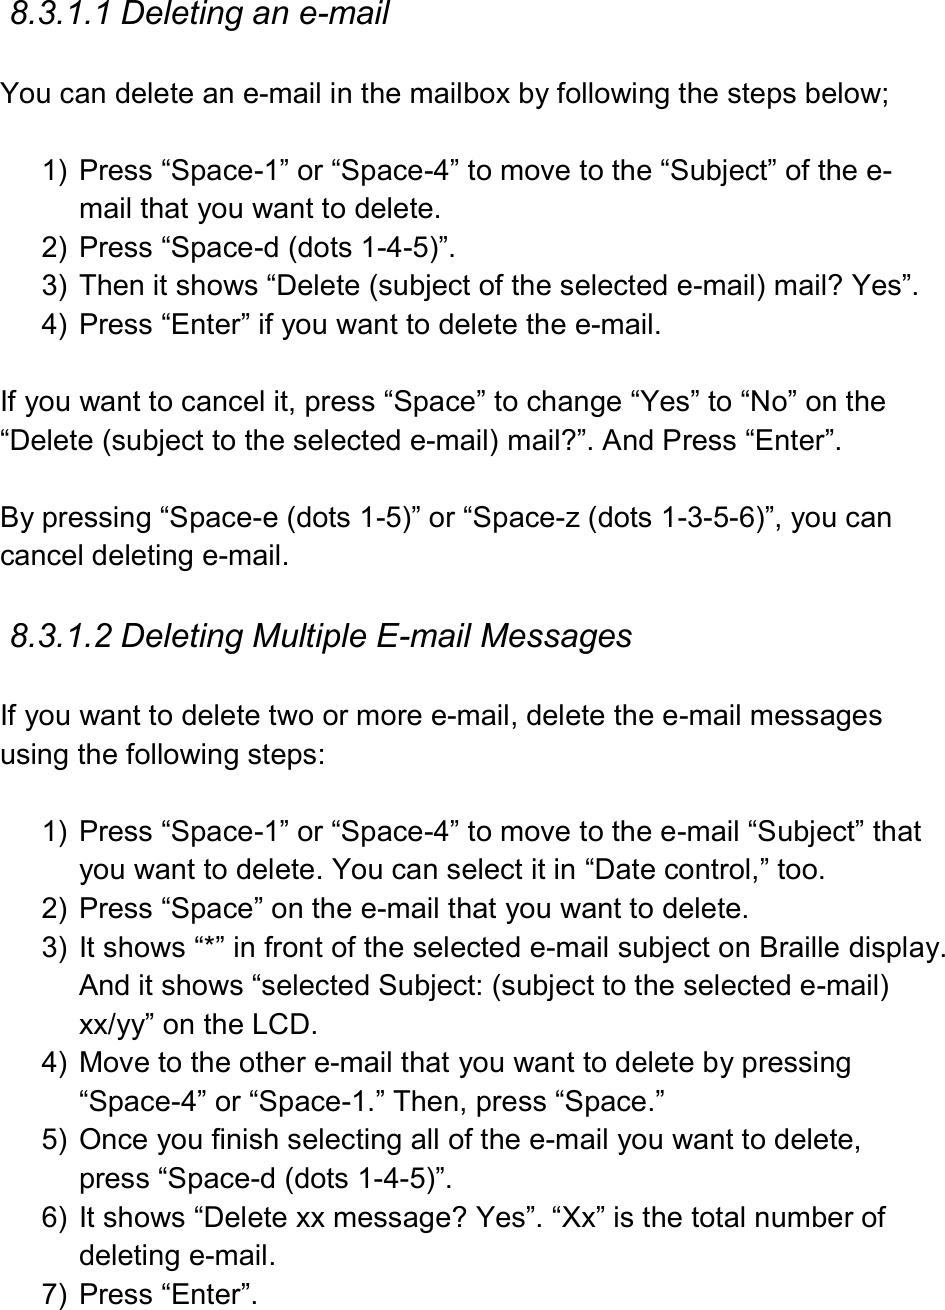  8.3.1.1 Deleting an e-mail  You can delete an e-mail in the mailbox by following the steps below;  1)  Press “Space-1” or “Space-4” to move to the “Subject” of the e-mail that you want to delete. 2)  Press “Space-d (dots 1-4-5)”.   3)  Then it shows “Delete (subject of the selected e-mail) mail? Yes”. 4)  Press “Enter” if you want to delete the e-mail.  If you want to cancel it, press “Space” to change “Yes” to “No” on the “Delete (subject to the selected e-mail) mail?”. And Press “Enter”.  By pressing “Space-e (dots 1-5)” or “Space-z (dots 1-3-5-6)”, you can cancel deleting e-mail.    8.3.1.2 Deleting Multiple E-mail Messages  If you want to delete two or more e-mail, delete the e-mail messages using the following steps:  1)  Press “Space-1” or “Space-4” to move to the e-mail “Subject” that you want to delete. You can select it in “Date control,” too. 2)  Press “Space” on the e-mail that you want to delete.   3)  It shows “*” in front of the selected e-mail subject on Braille display. And it shows “selected Subject: (subject to the selected e-mail) xx/yy” on the LCD. 4)  Move to the other e-mail that you want to delete by pressing “Space-4” or “Space-1.” Then, press “Space.” 5)  Once you finish selecting all of the e-mail you want to delete, press “Space-d (dots 1-4-5)”. 6)  It shows “Delete xx message? Yes”. “Xx” is the total number of deleting e-mail.   7)  Press “Enter”.  